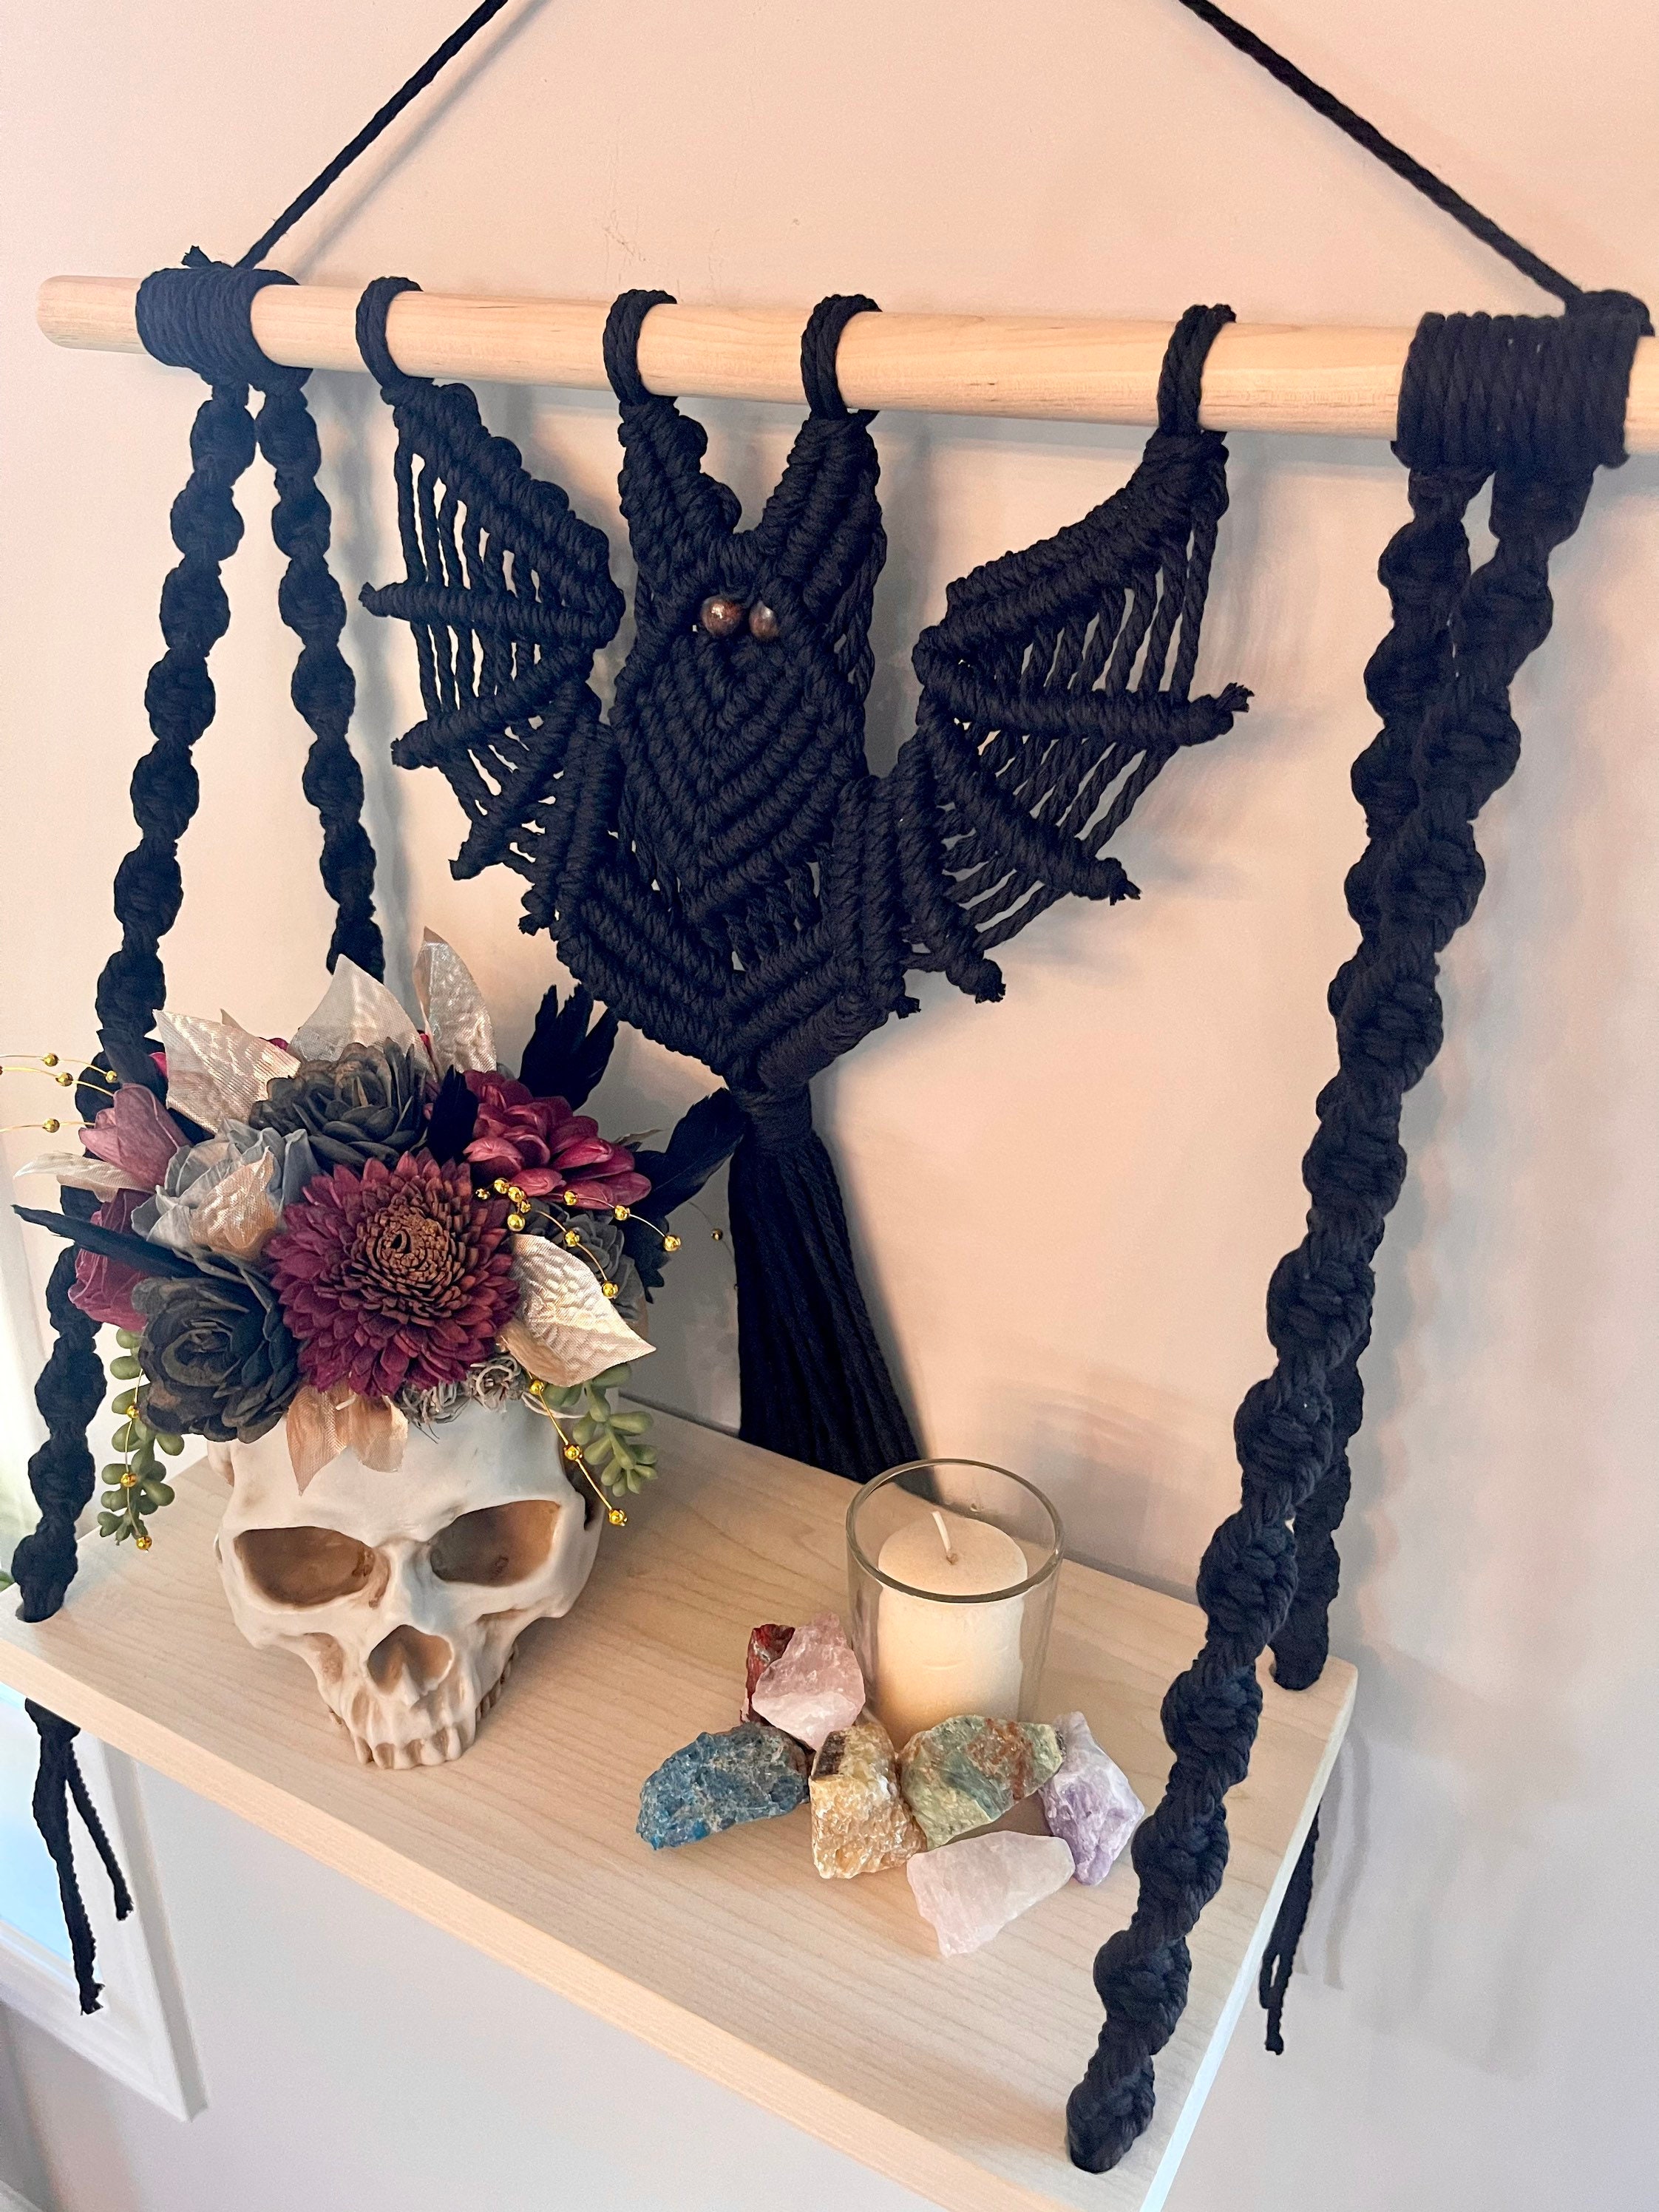 INSTITIZER Macrame Wall Hanging, Bat Design Boho Tapestry Macrame Wall  Decor, Gothic Handmade Woven Tapestry for Home Decoration Halloween